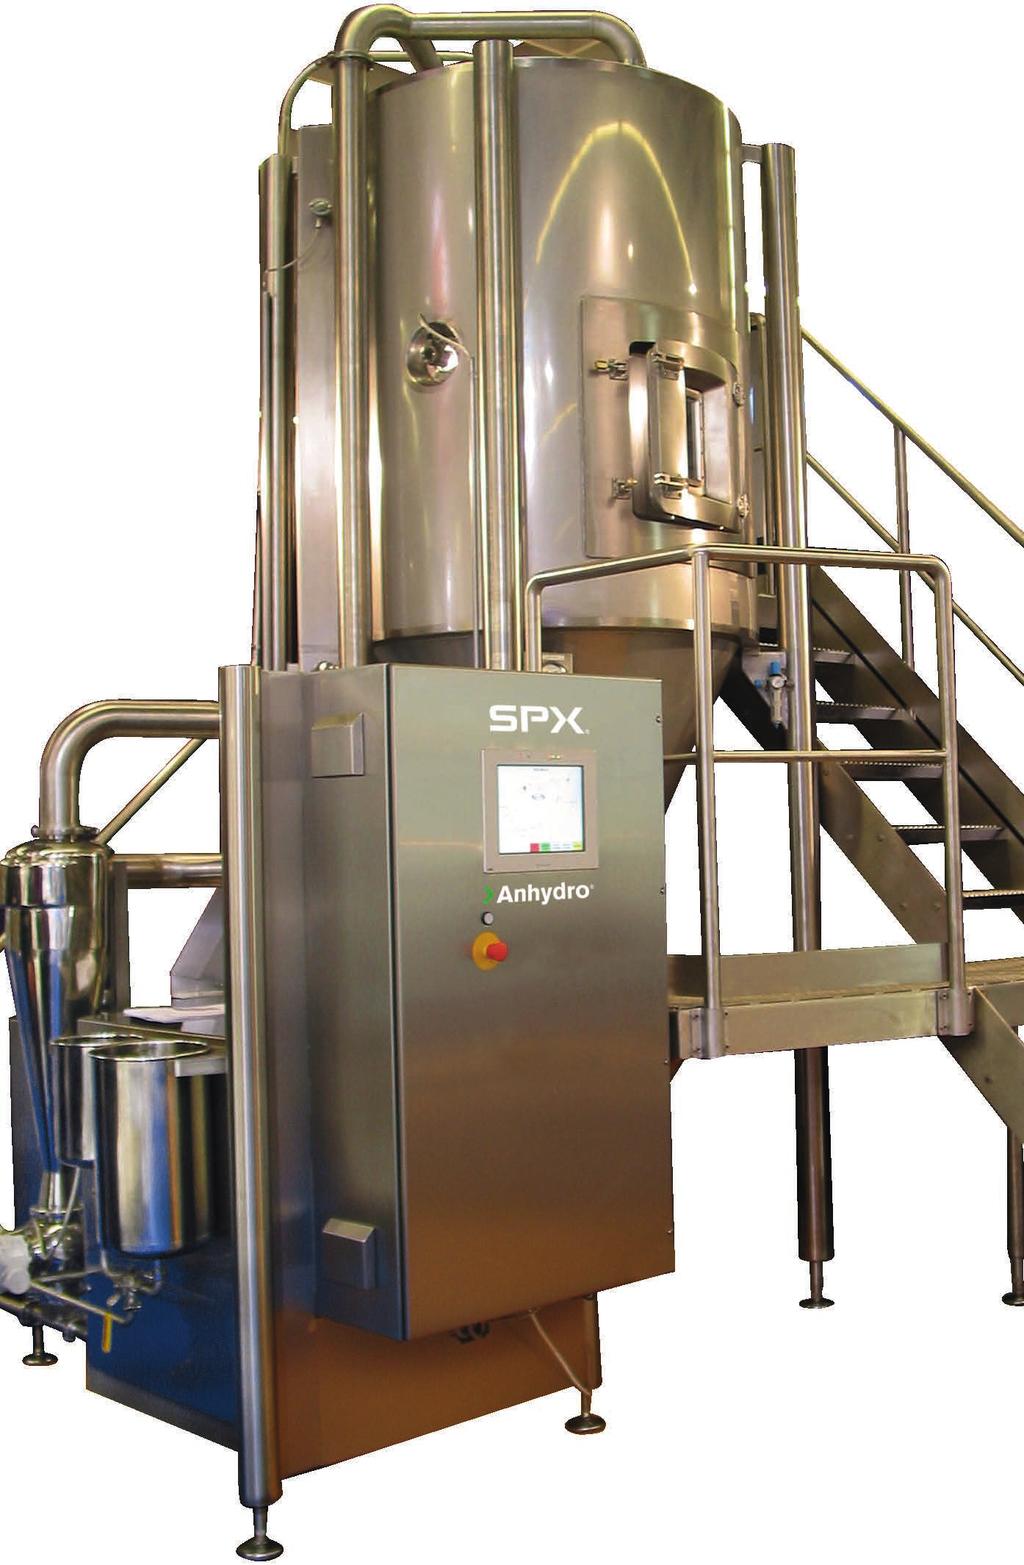 Anhydro Small Scale Plants SPX offers a comprehensive range of Anhydro Small Scale Plants within Spray Drying, Spin Flash Drying, Evaporation and Fluid